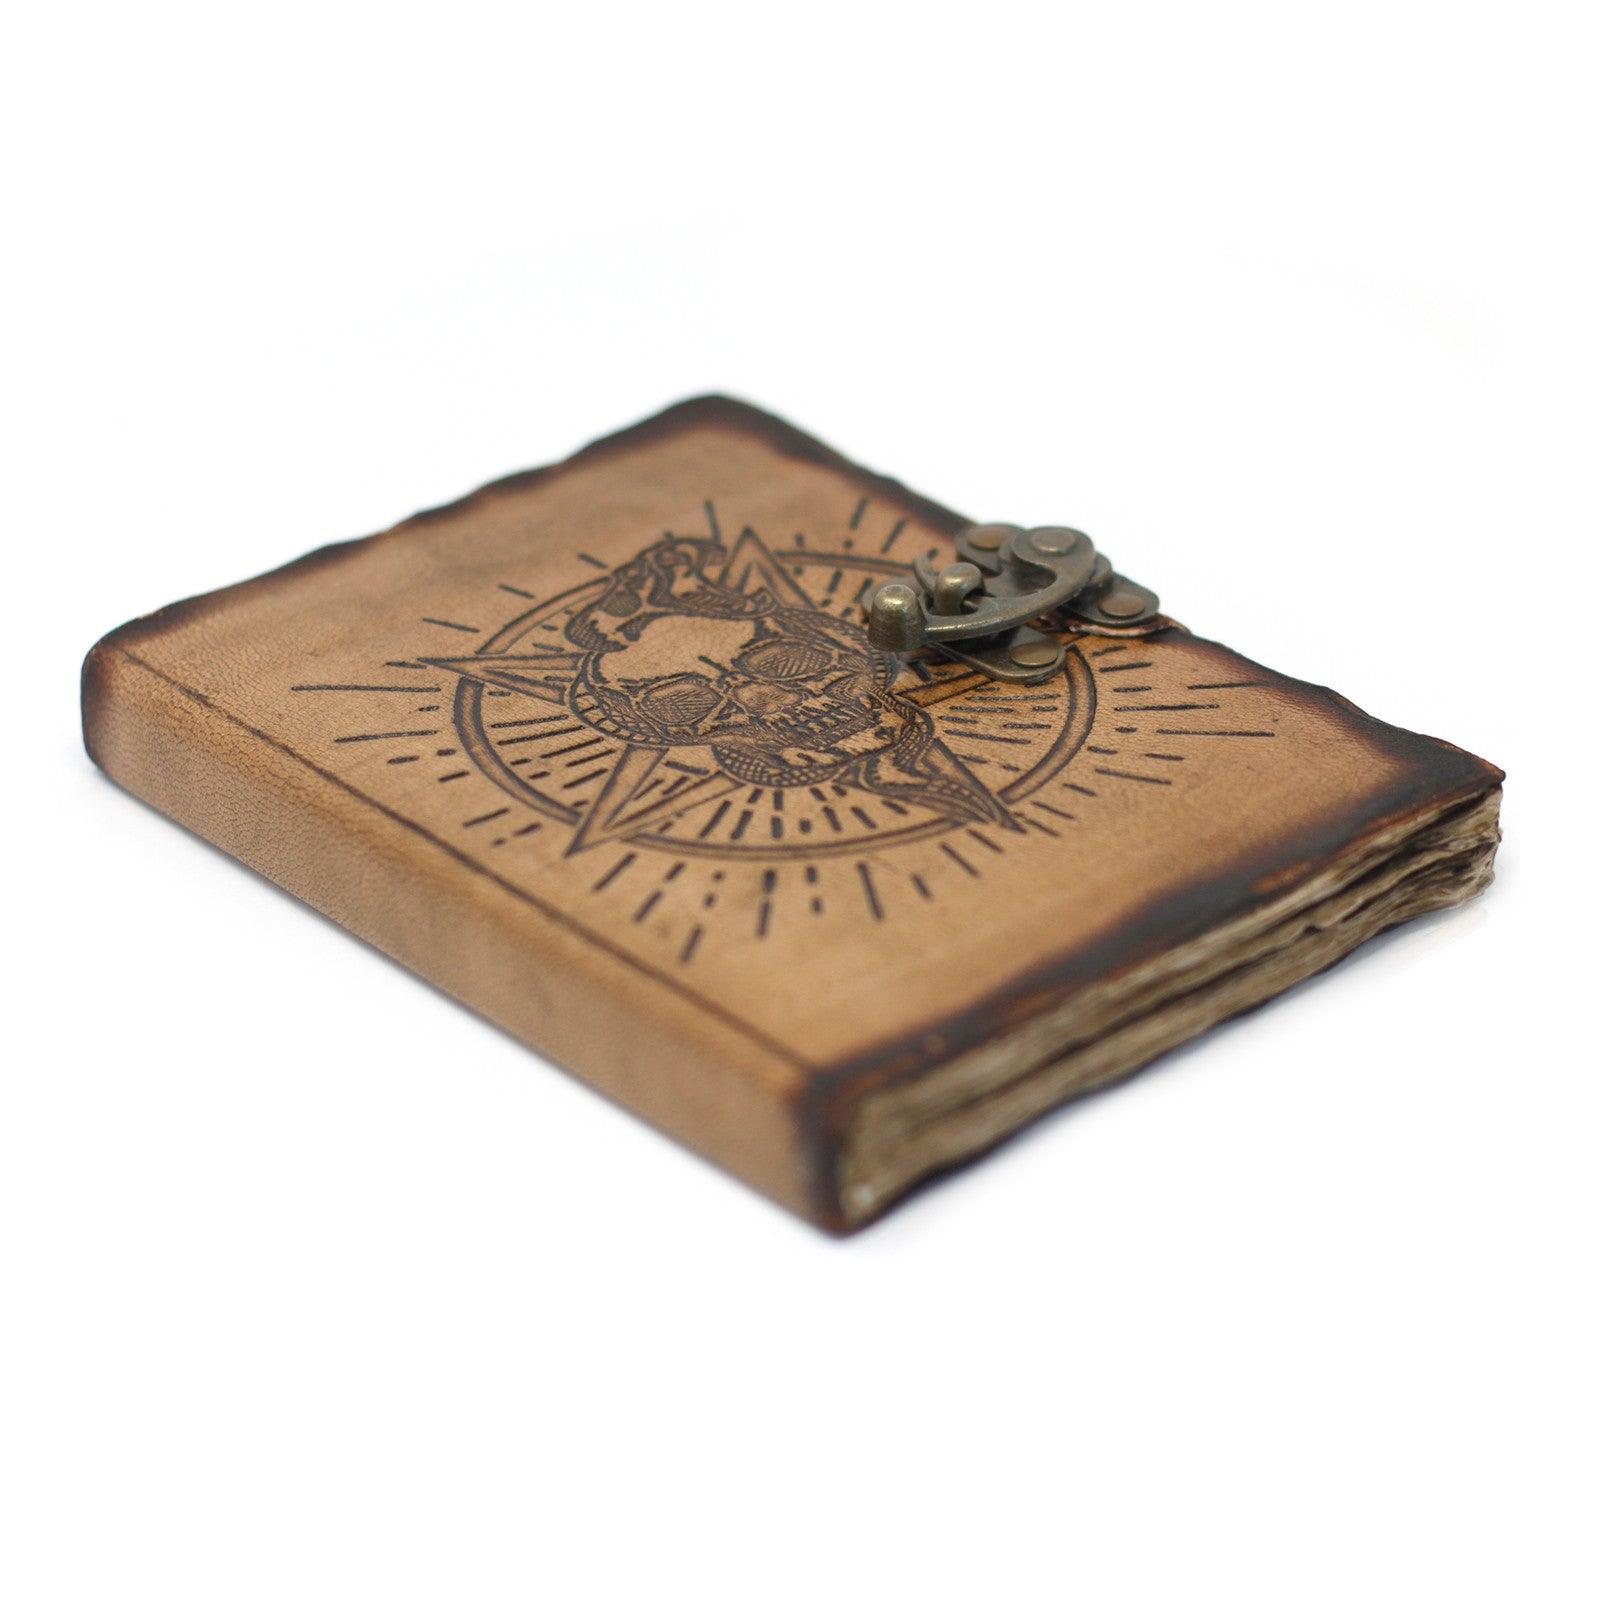 Leather Pentagon & Skull with Burns Detail Notebook (7x5") - DuvetDay.co.uk